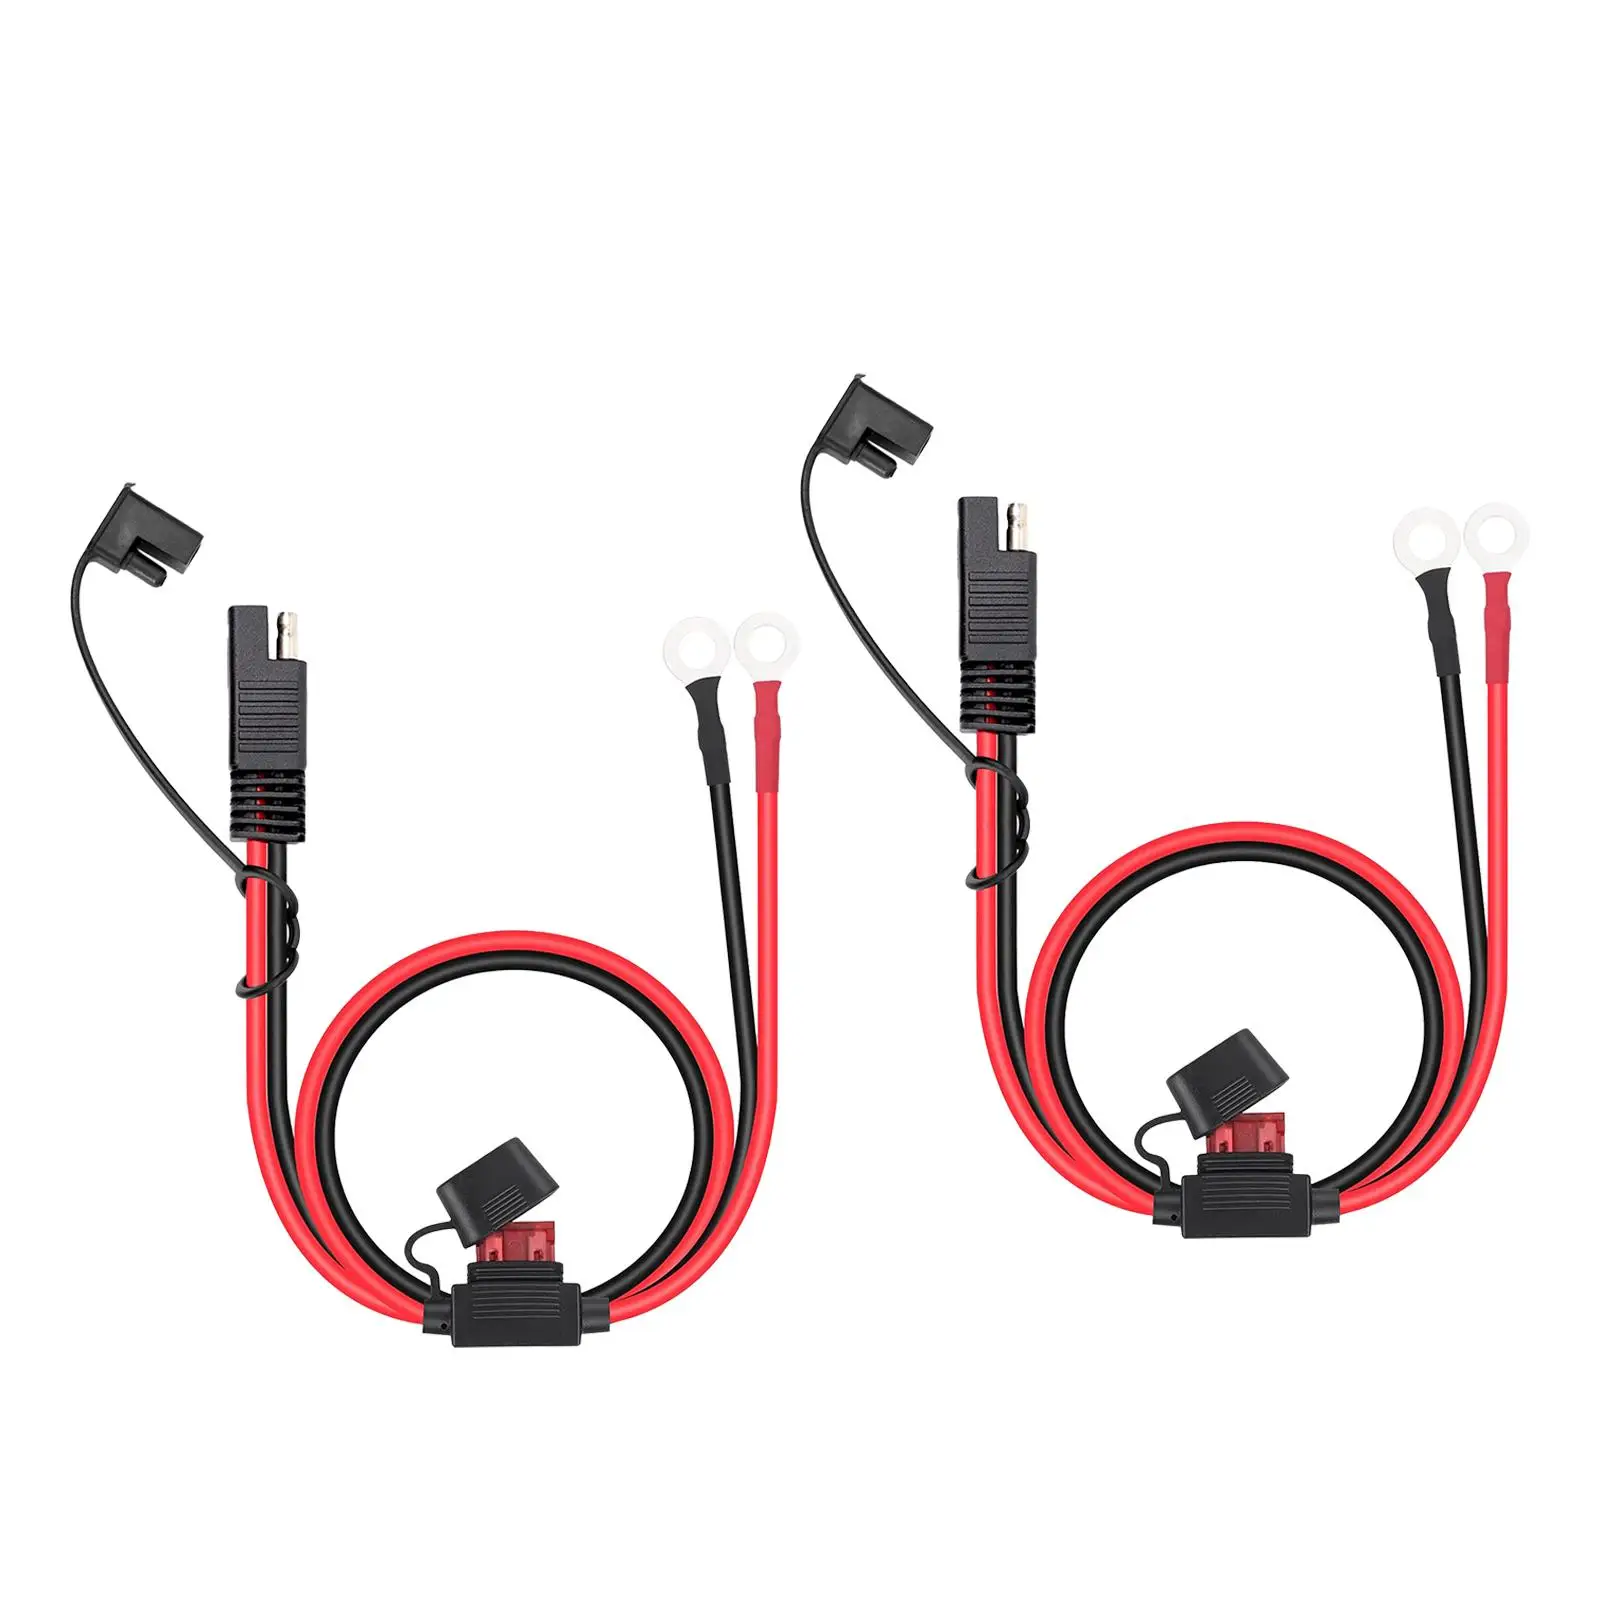 

2Pcs 16AWG SAE Battery Connector Cable Accessory Plug Copper Wire SAE to O Rings Terminal Harness for Vehicle Outdoor Equipment